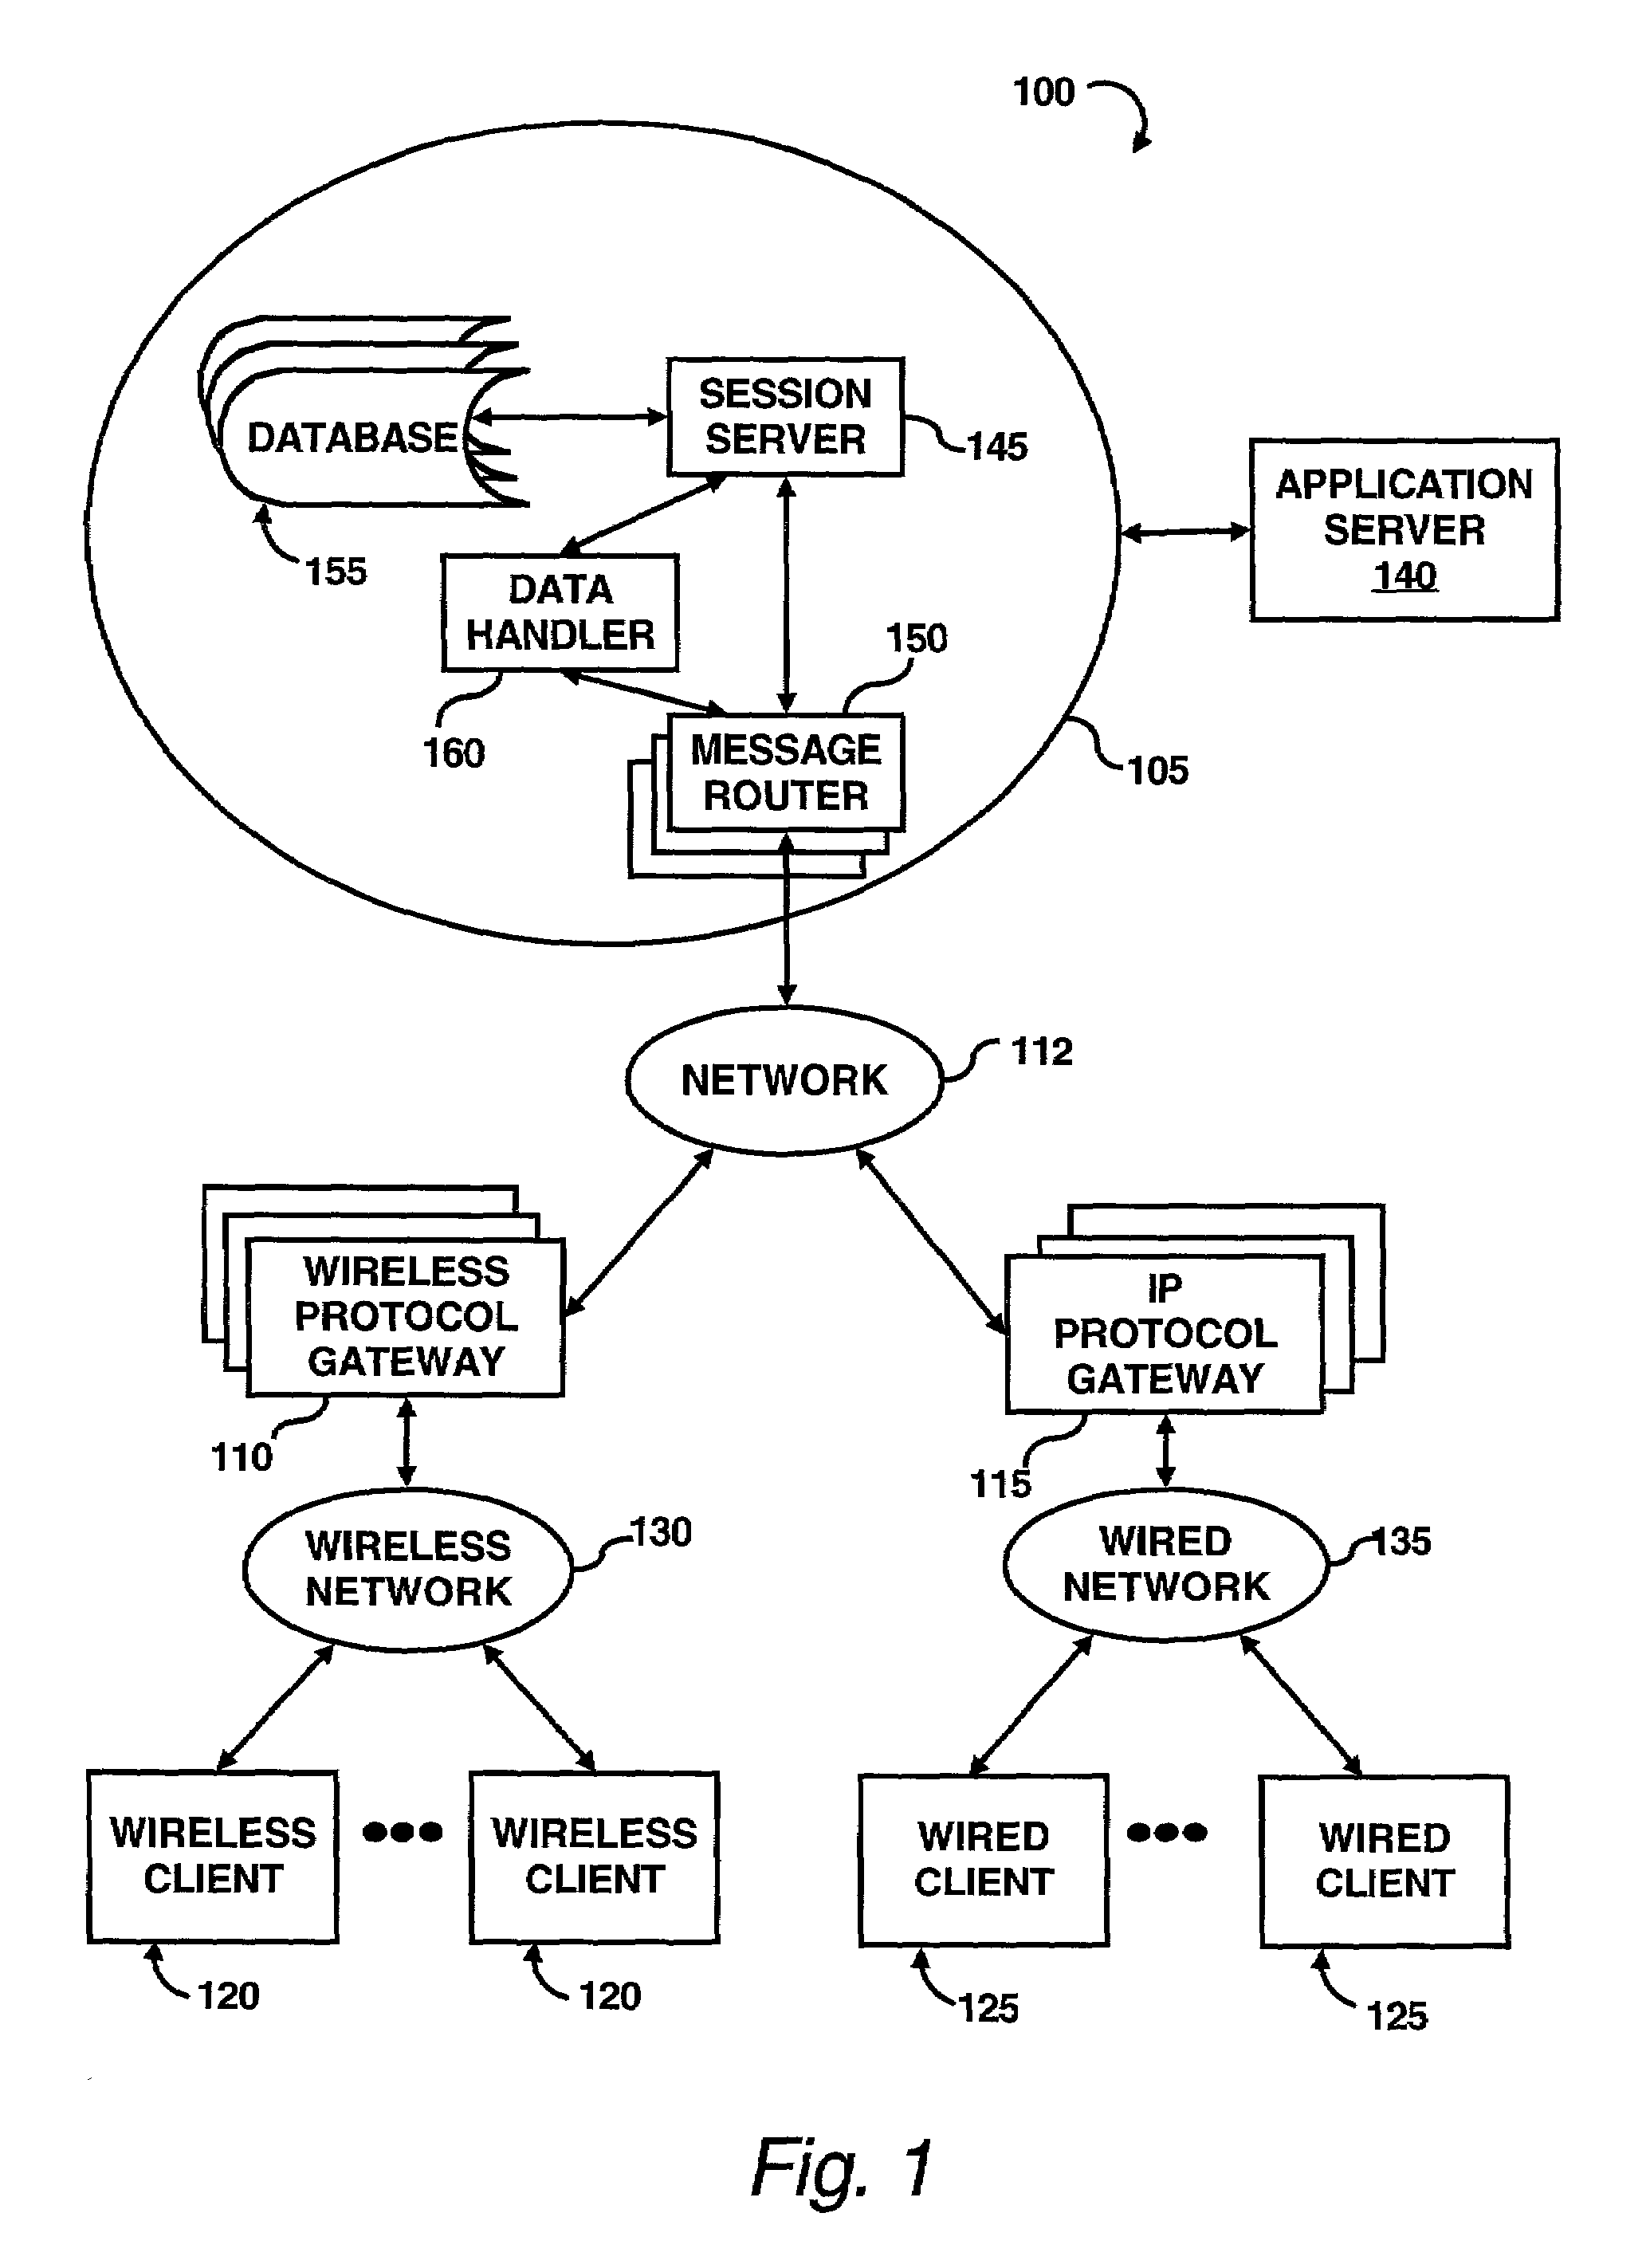 System for automated, mid-session, user-directed, device-to-device session transfer system